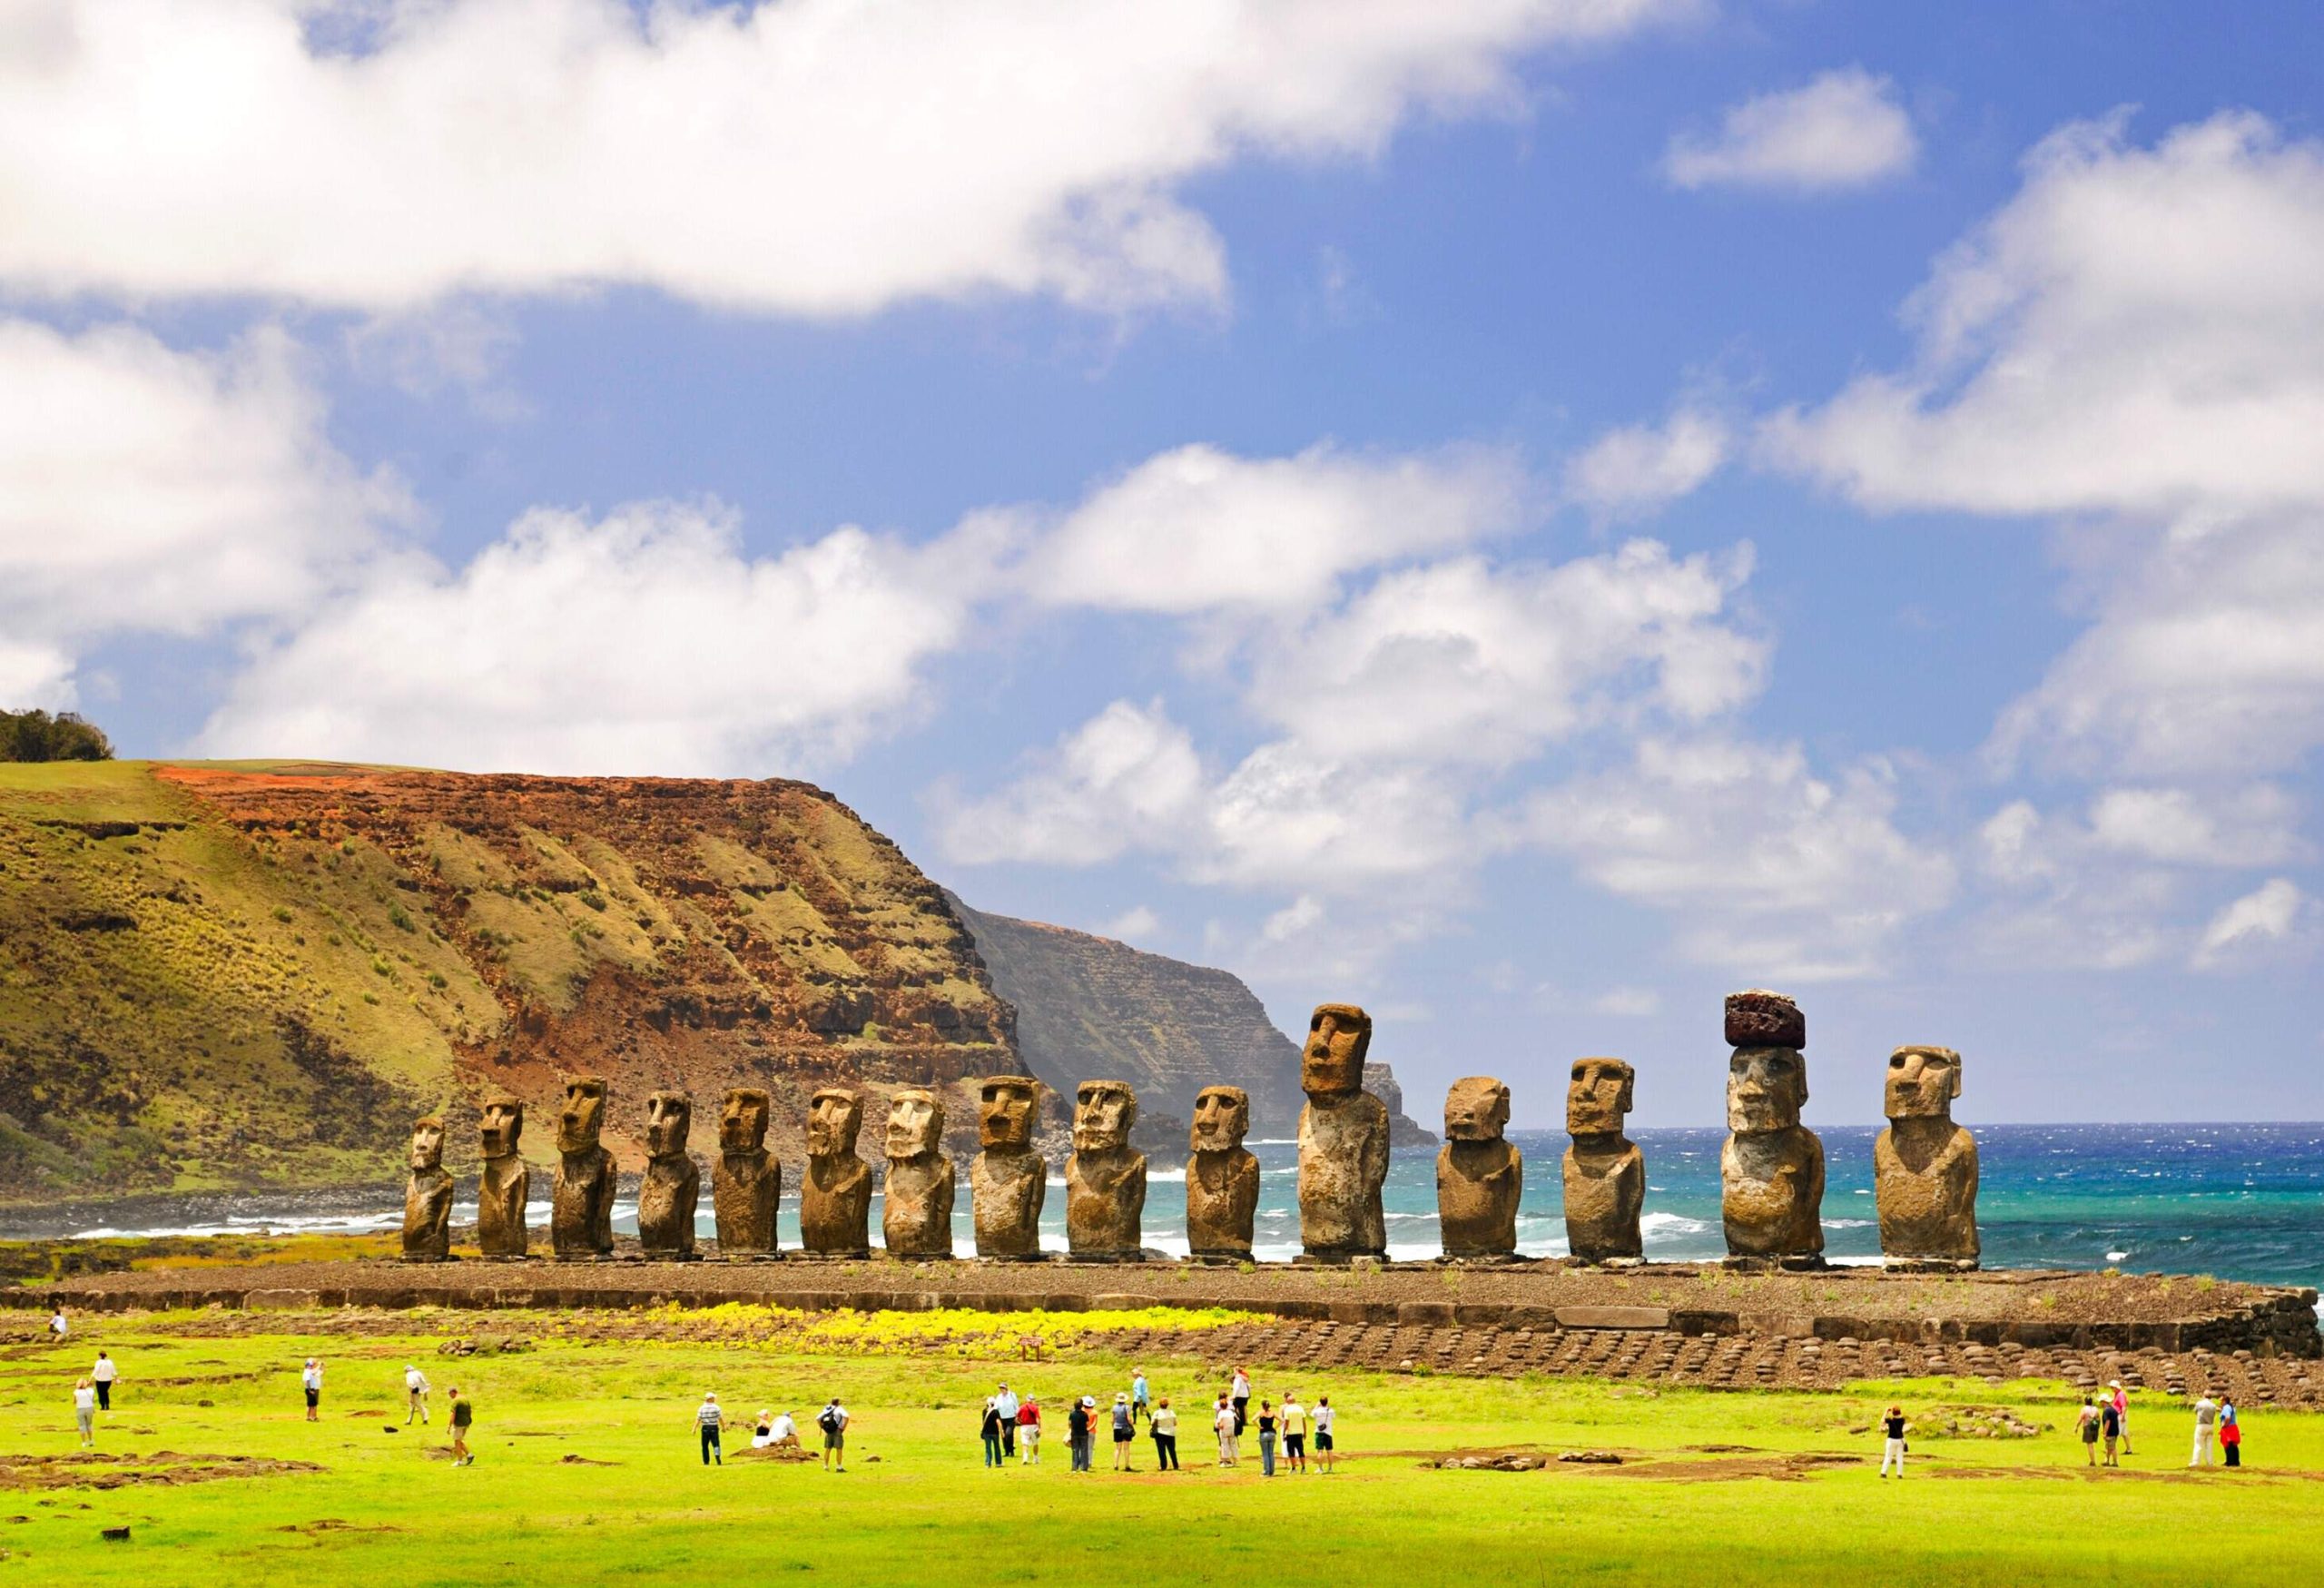 The iconic 15 Moai statues, large stone monoliths carved by the Rapa Nui people, stand tall along the coastline, with visitors exploring the nearby turf and a dramatic coastal cliff serving as the backdrop.